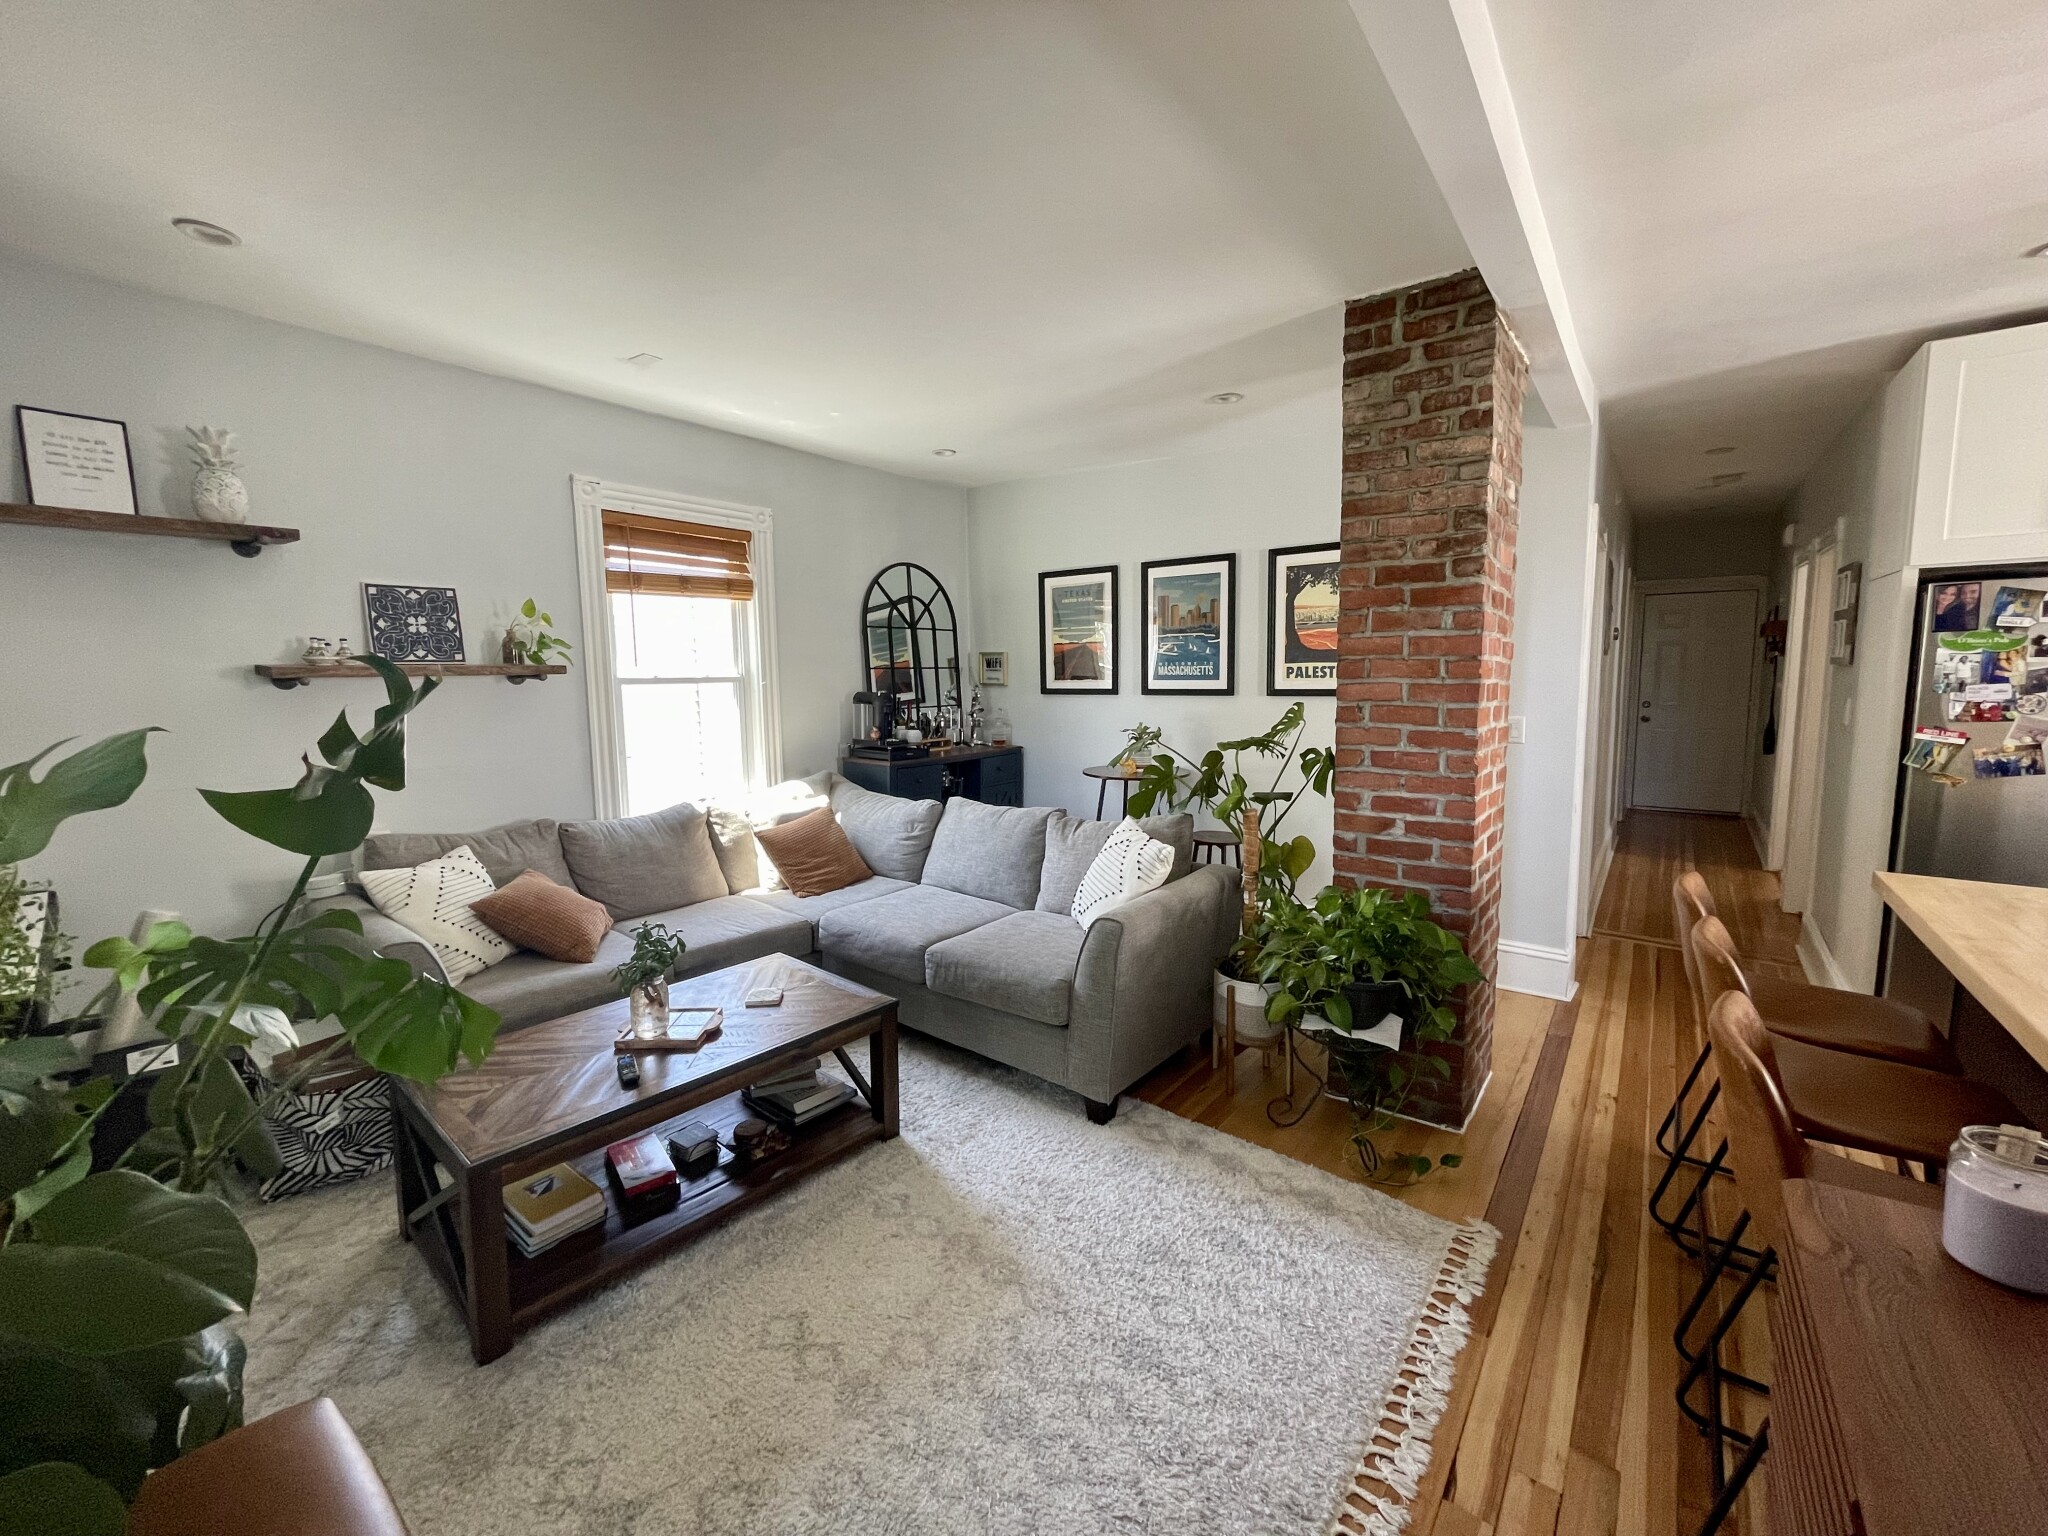 Photos of apartment on Homes Ave.,Boston MA 02122